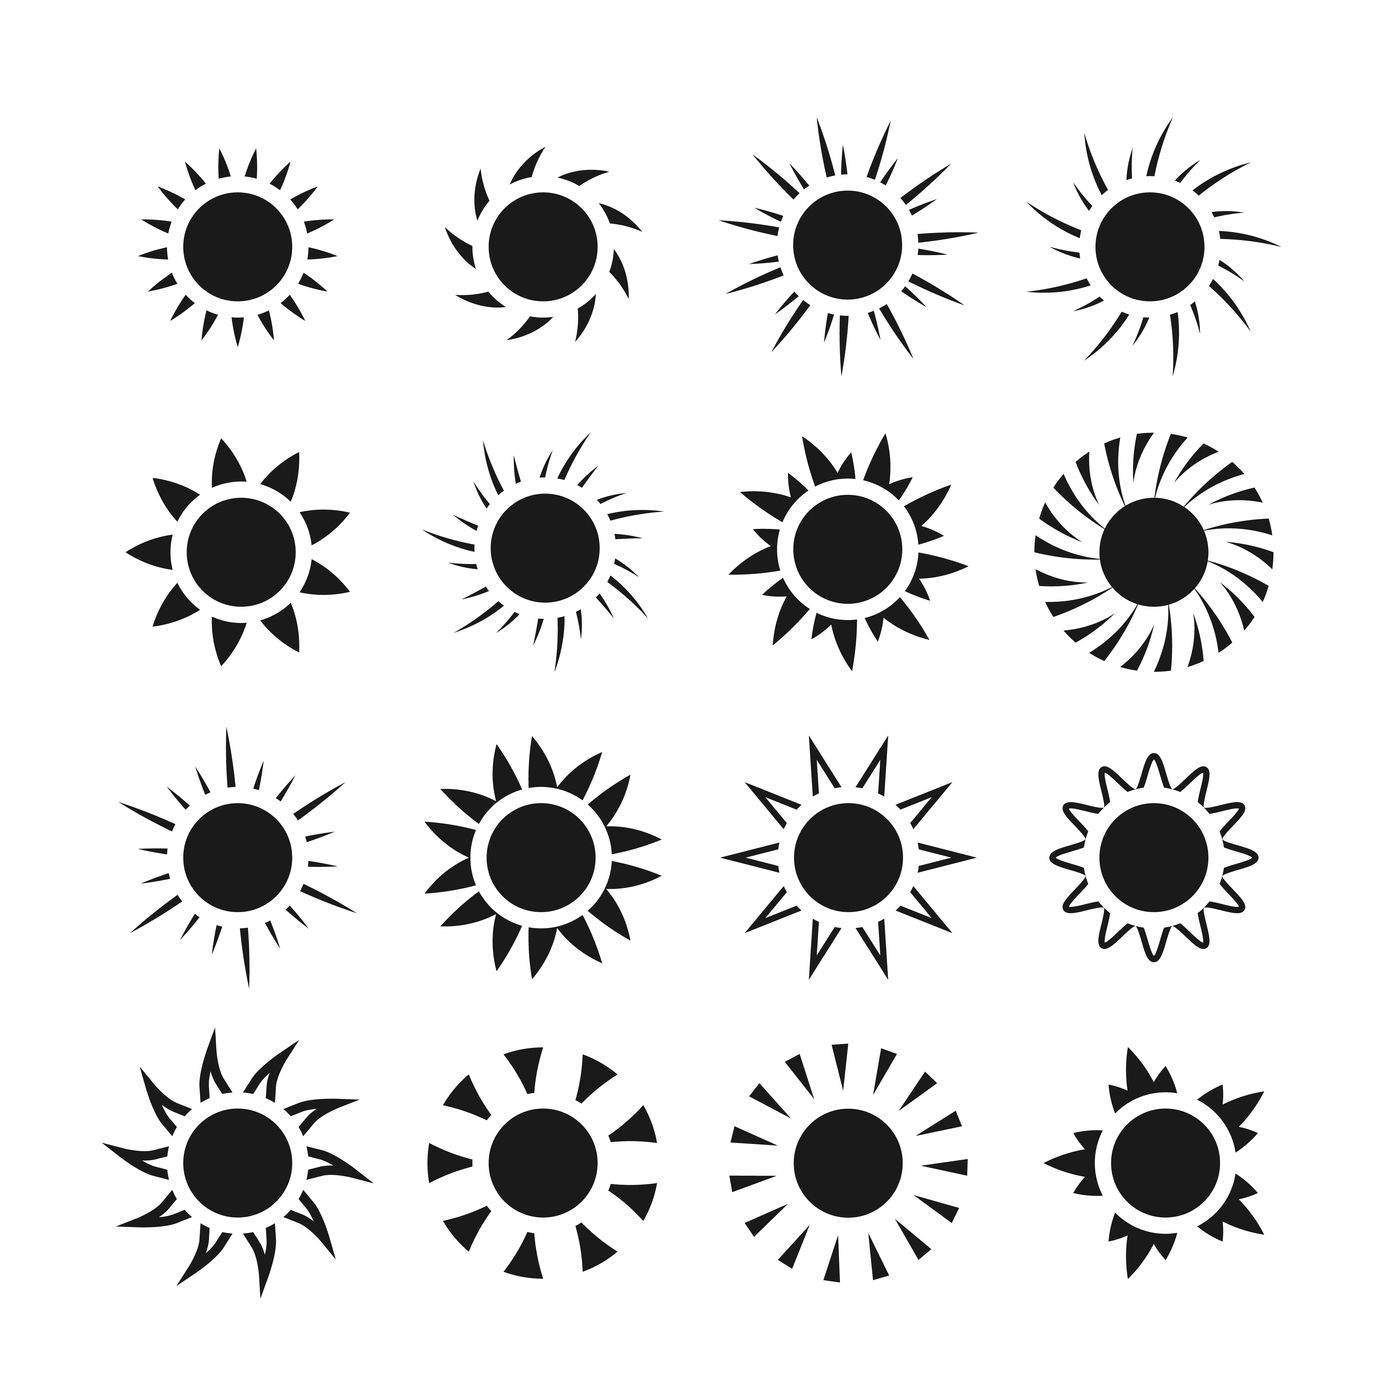 Sun icons vector set By Microvector | TheHungryJPEG